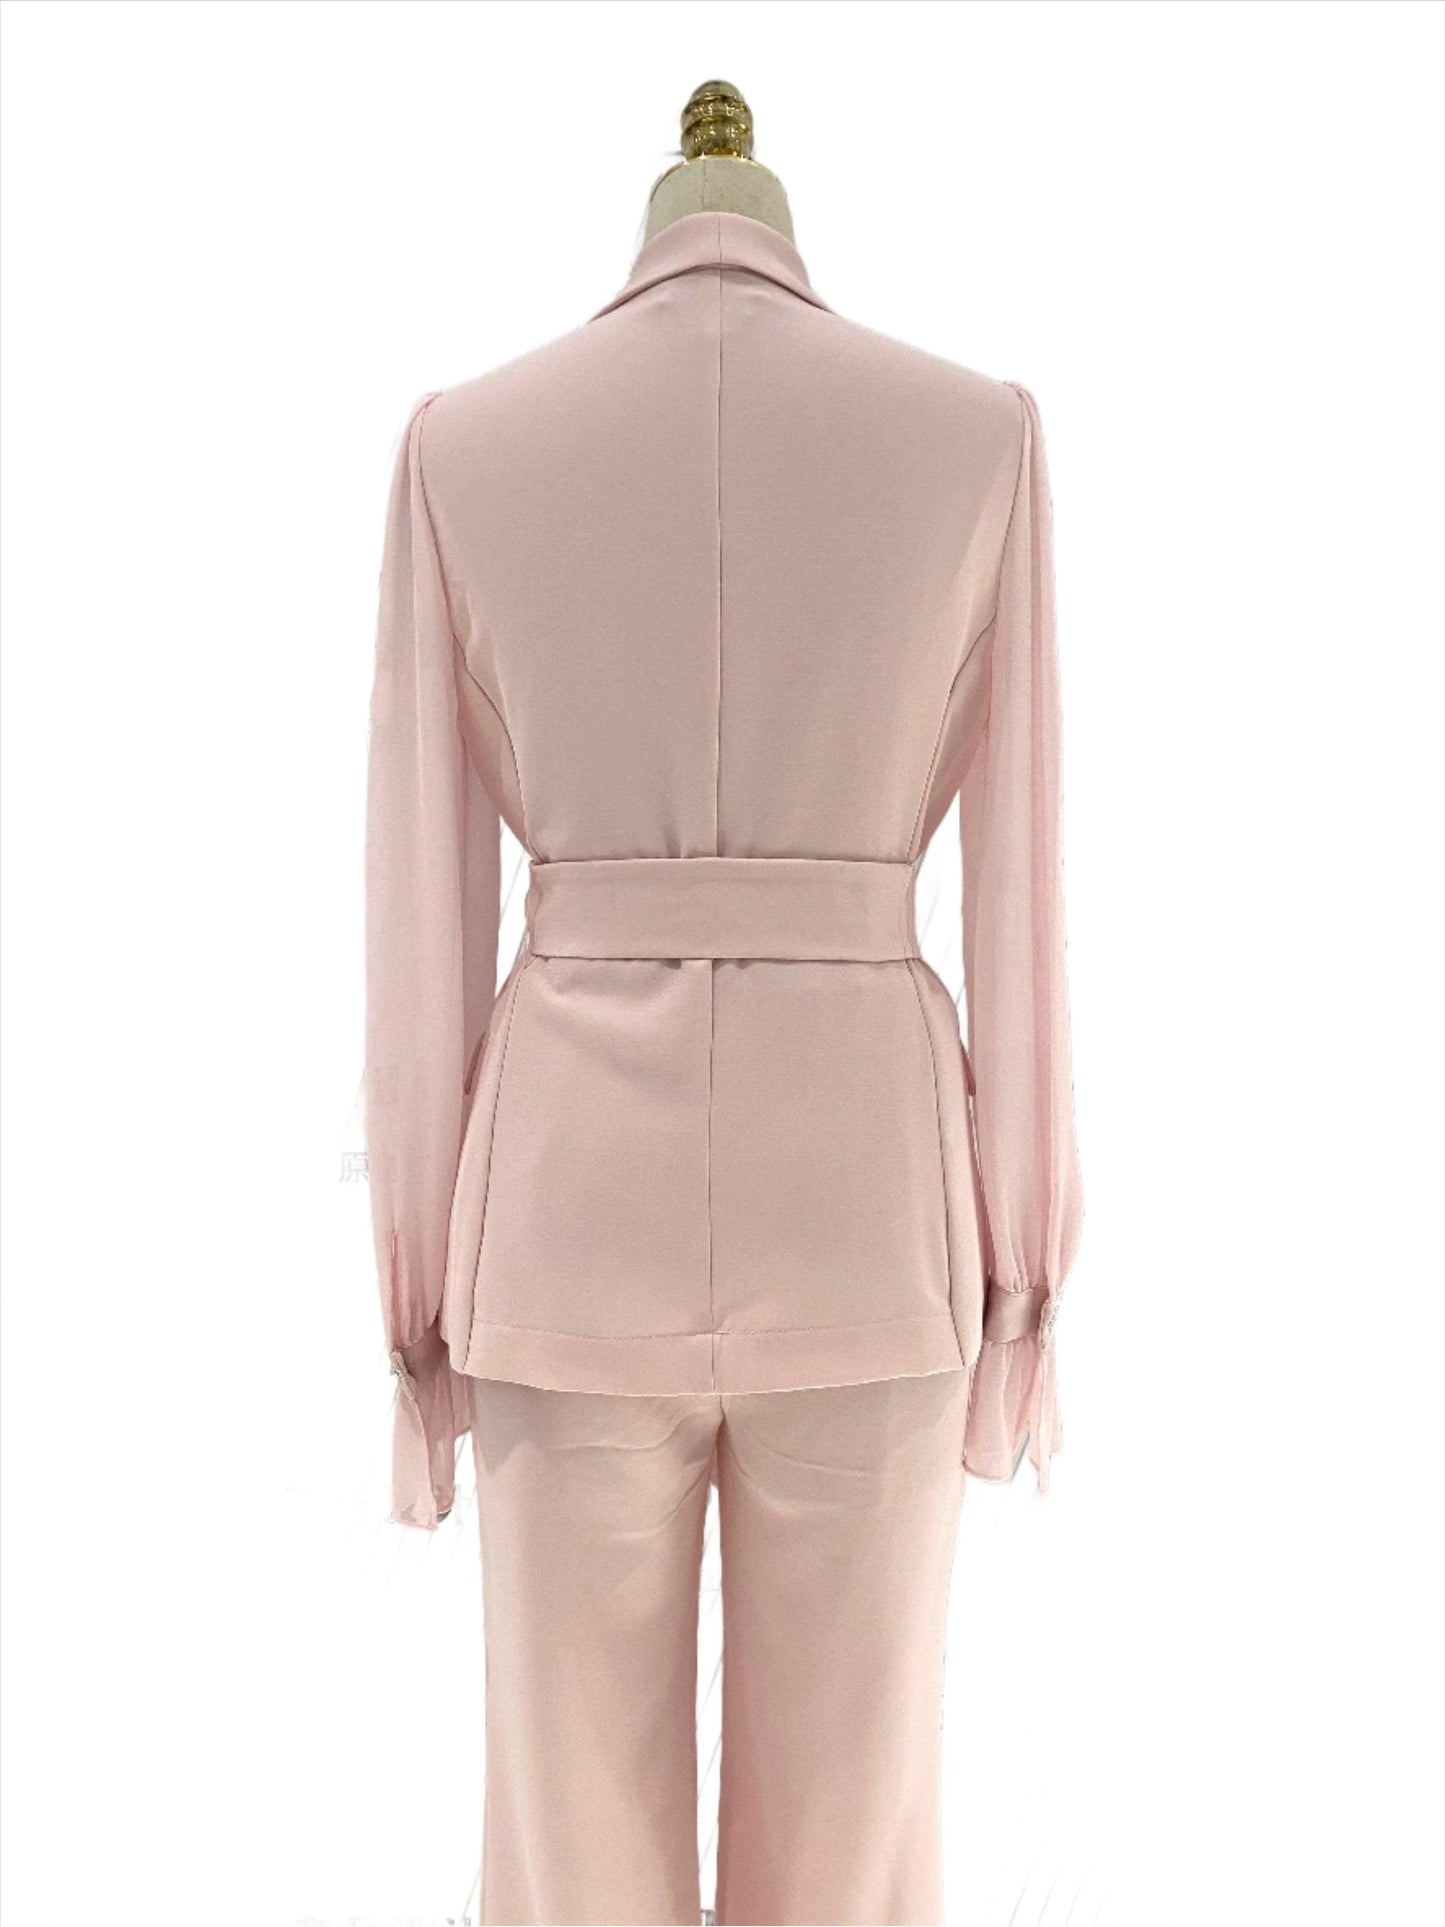 Belted Women Pant Suit, Spliced Sleeves -Two Piece Trouser Suit - Pantsuit - Guocali